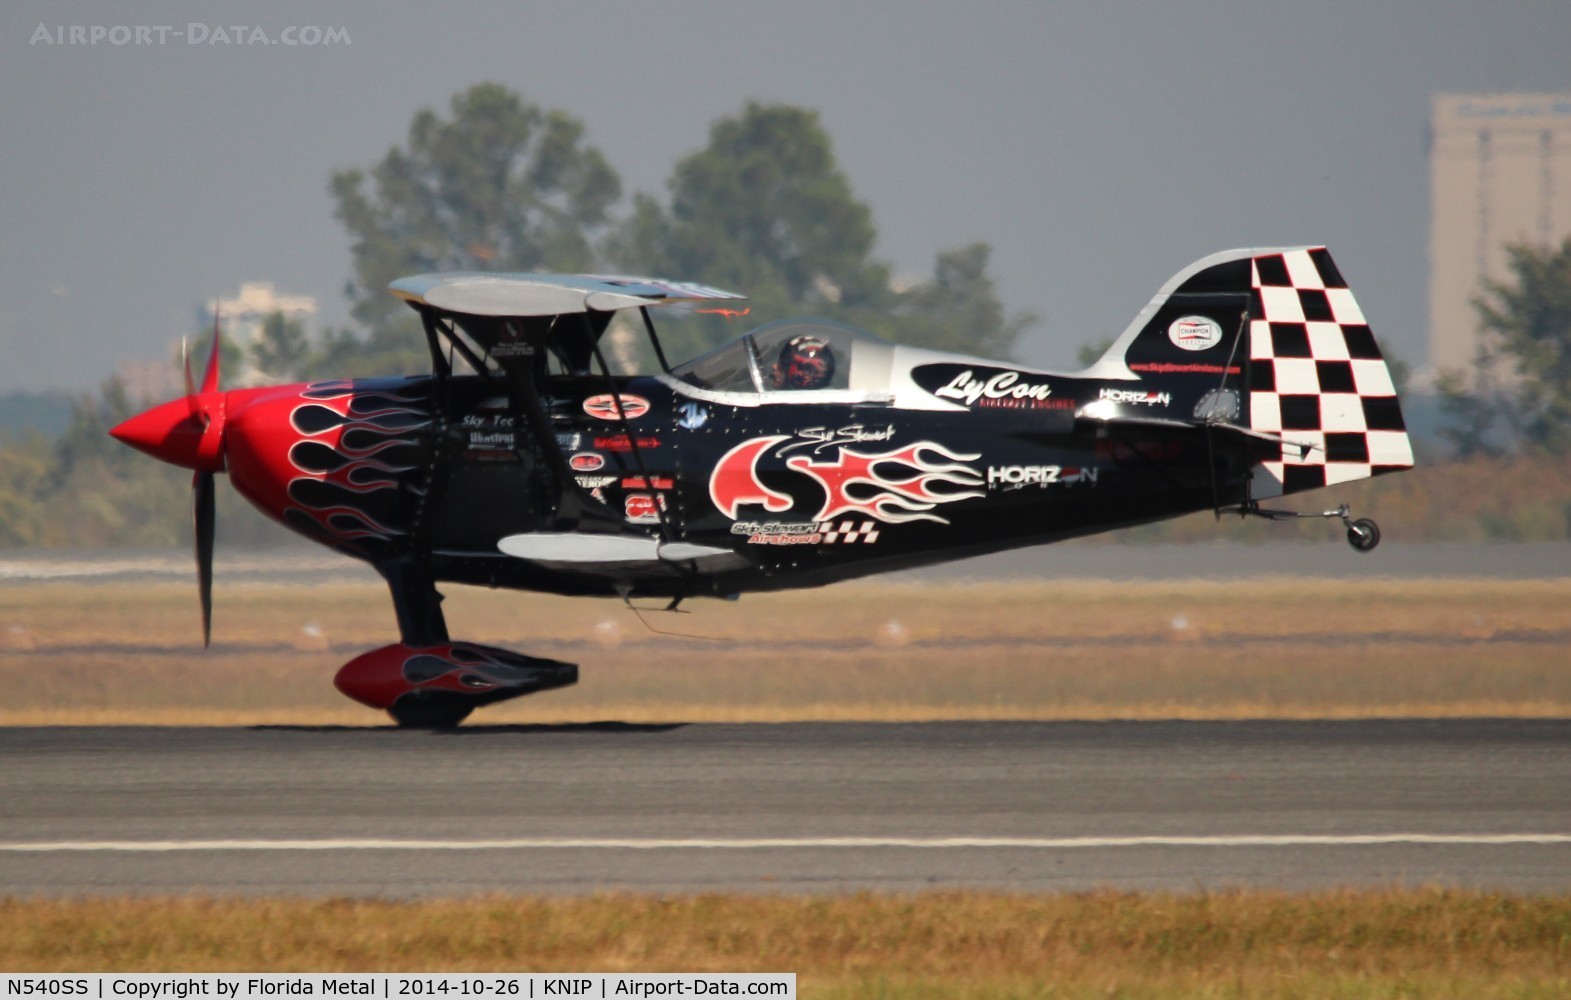 N540SS, 2011 Pitts S-2S Special C/N 006, NAS JAX 2014 zx